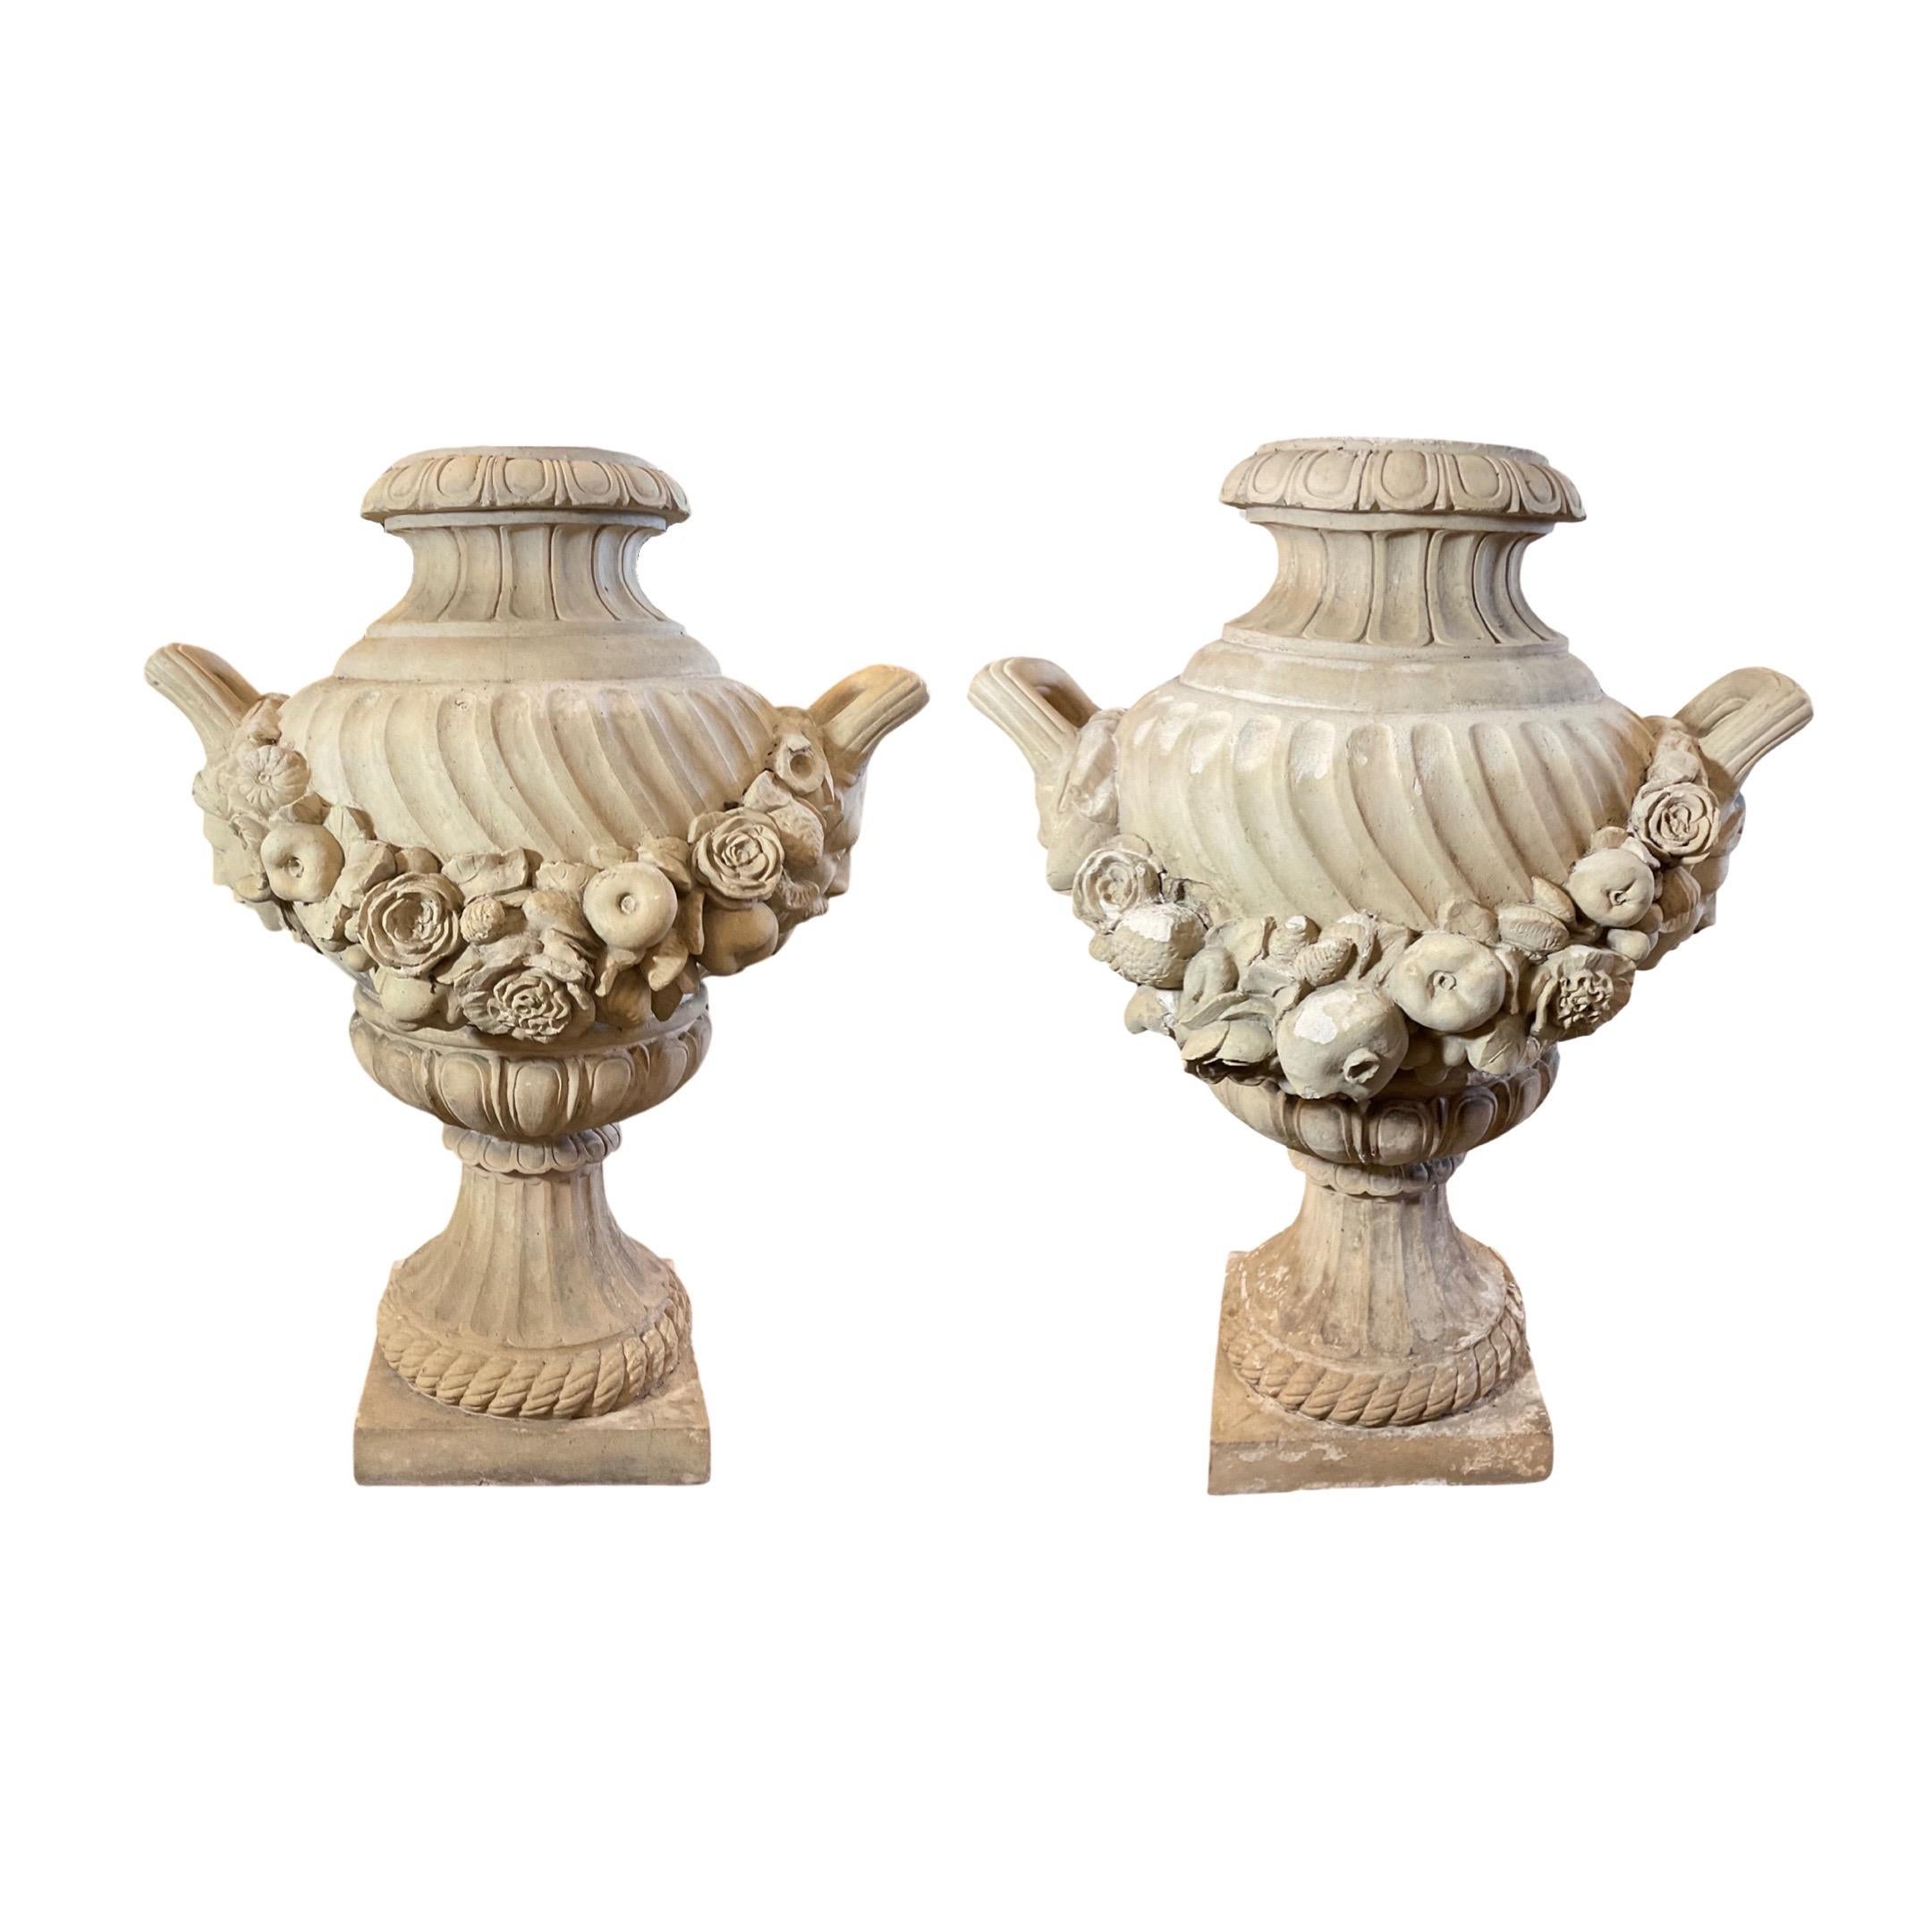 These English Terracotta Planters are the perfect addition to your outdoor space. Featuring an elegant terracotta style with carved floral and face designs, these planters come as a pair and will add a touch of sophistication to your garden. circa